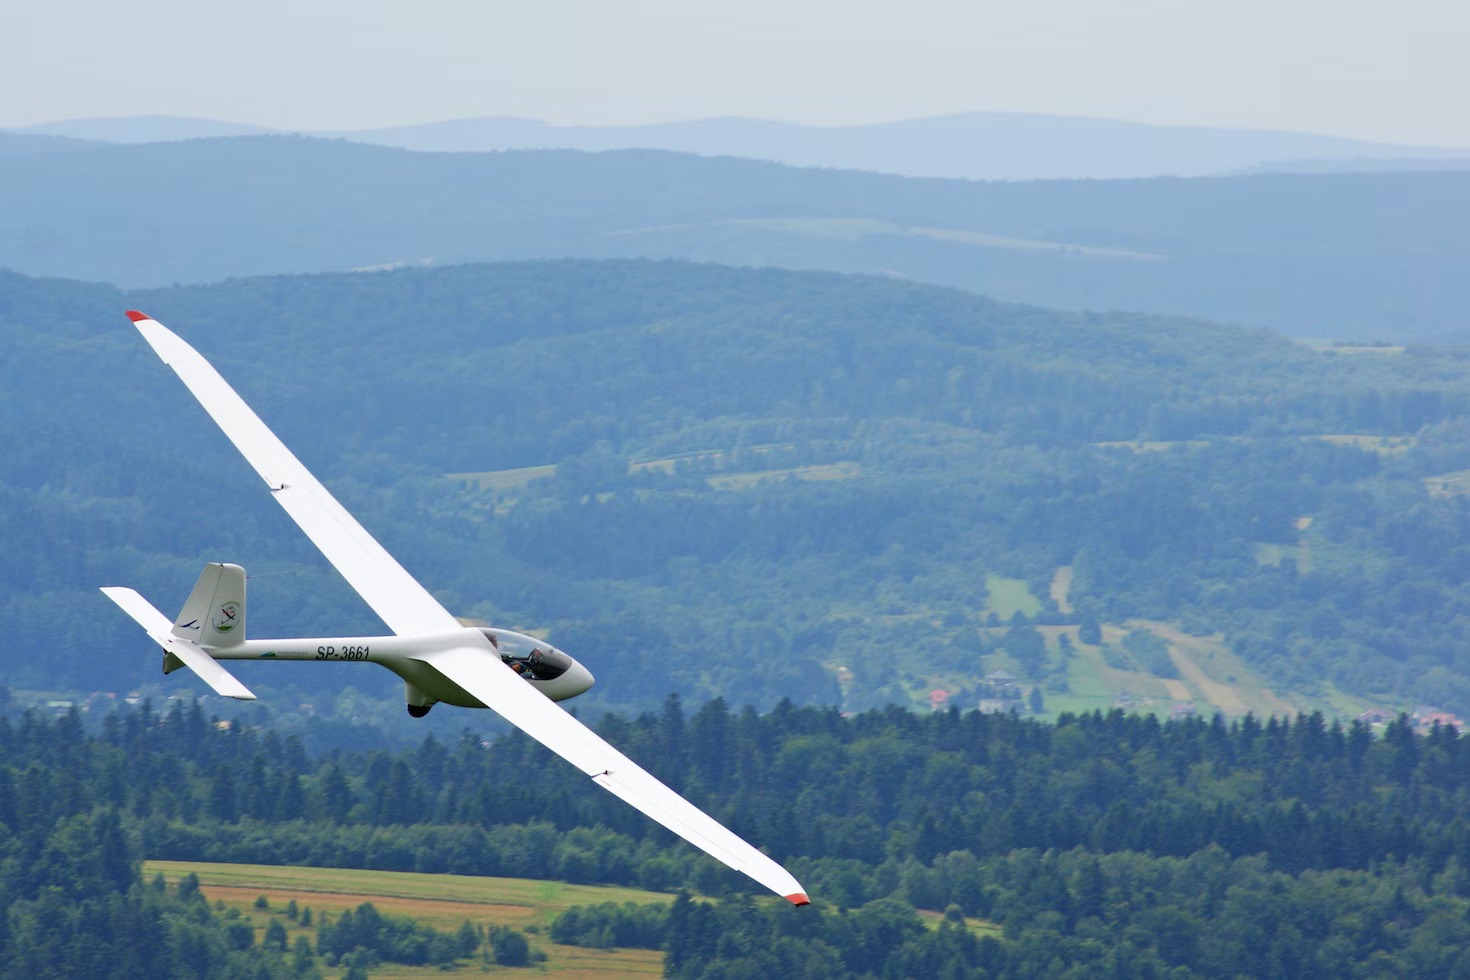 Photograph of a glider in the air